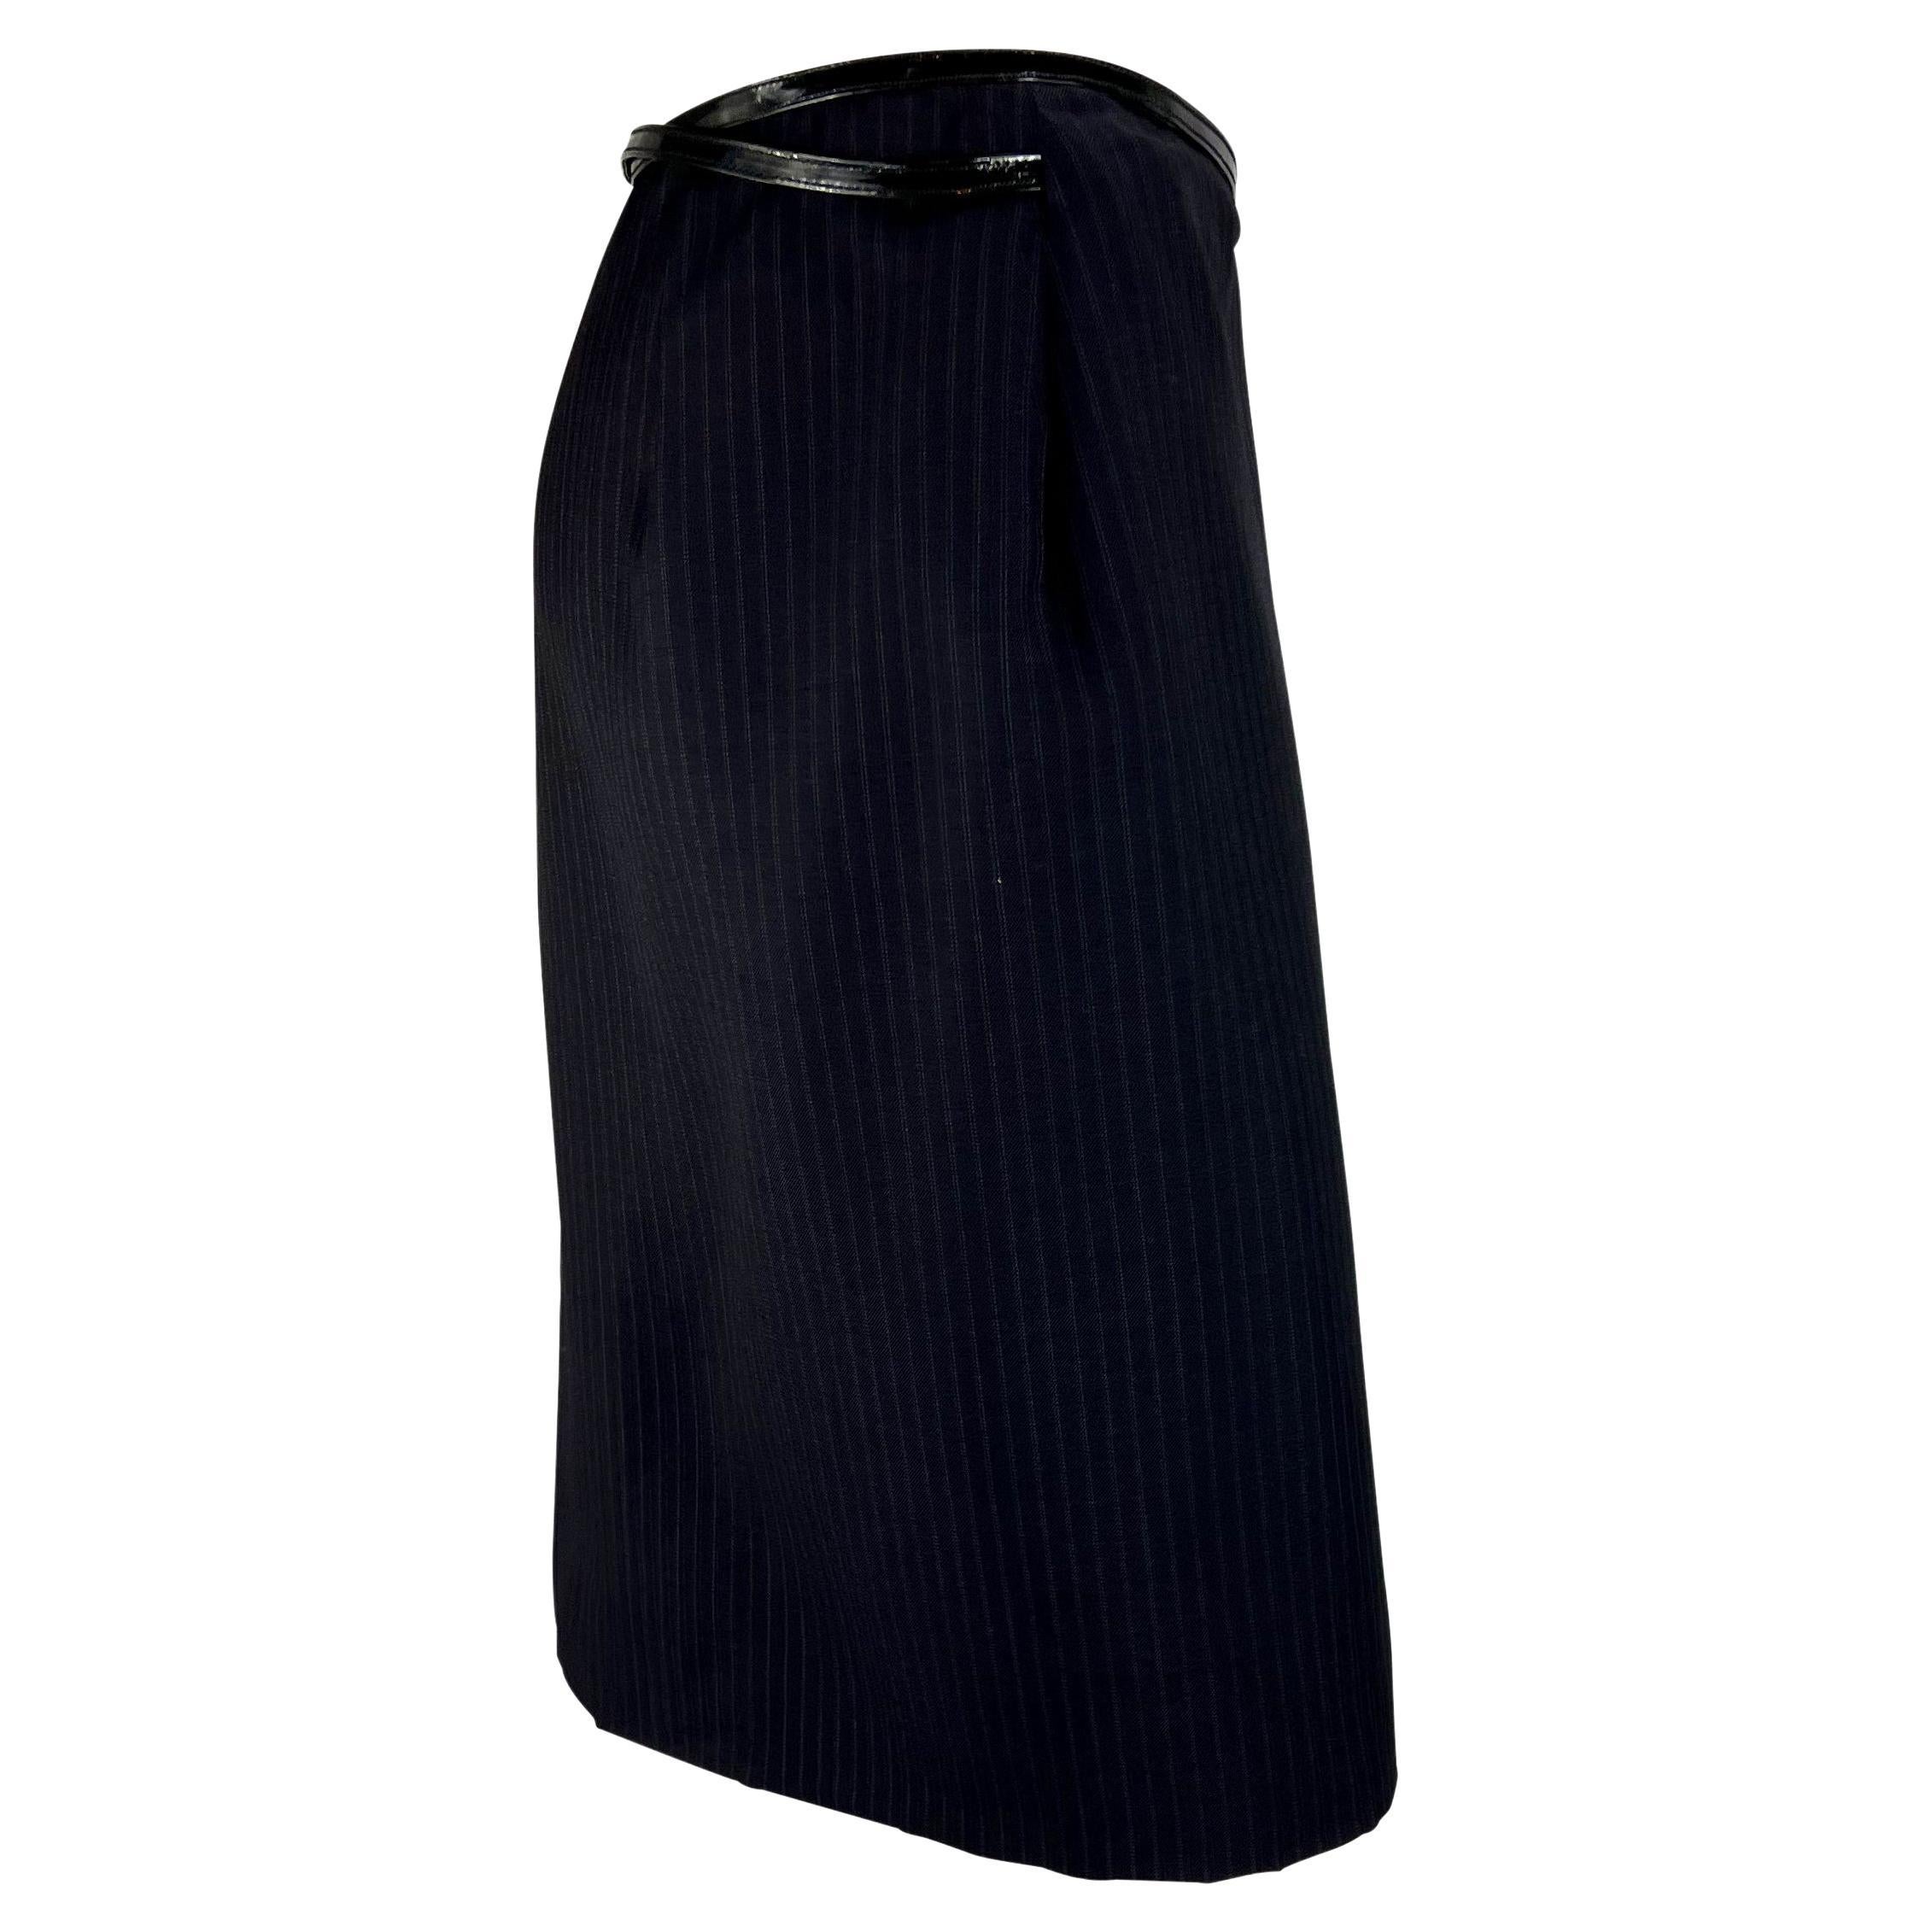 F/W 1997 Gucci by Tom Ford Runway Patent G Buckle Navy Pinstripe Wrap Skirt 9